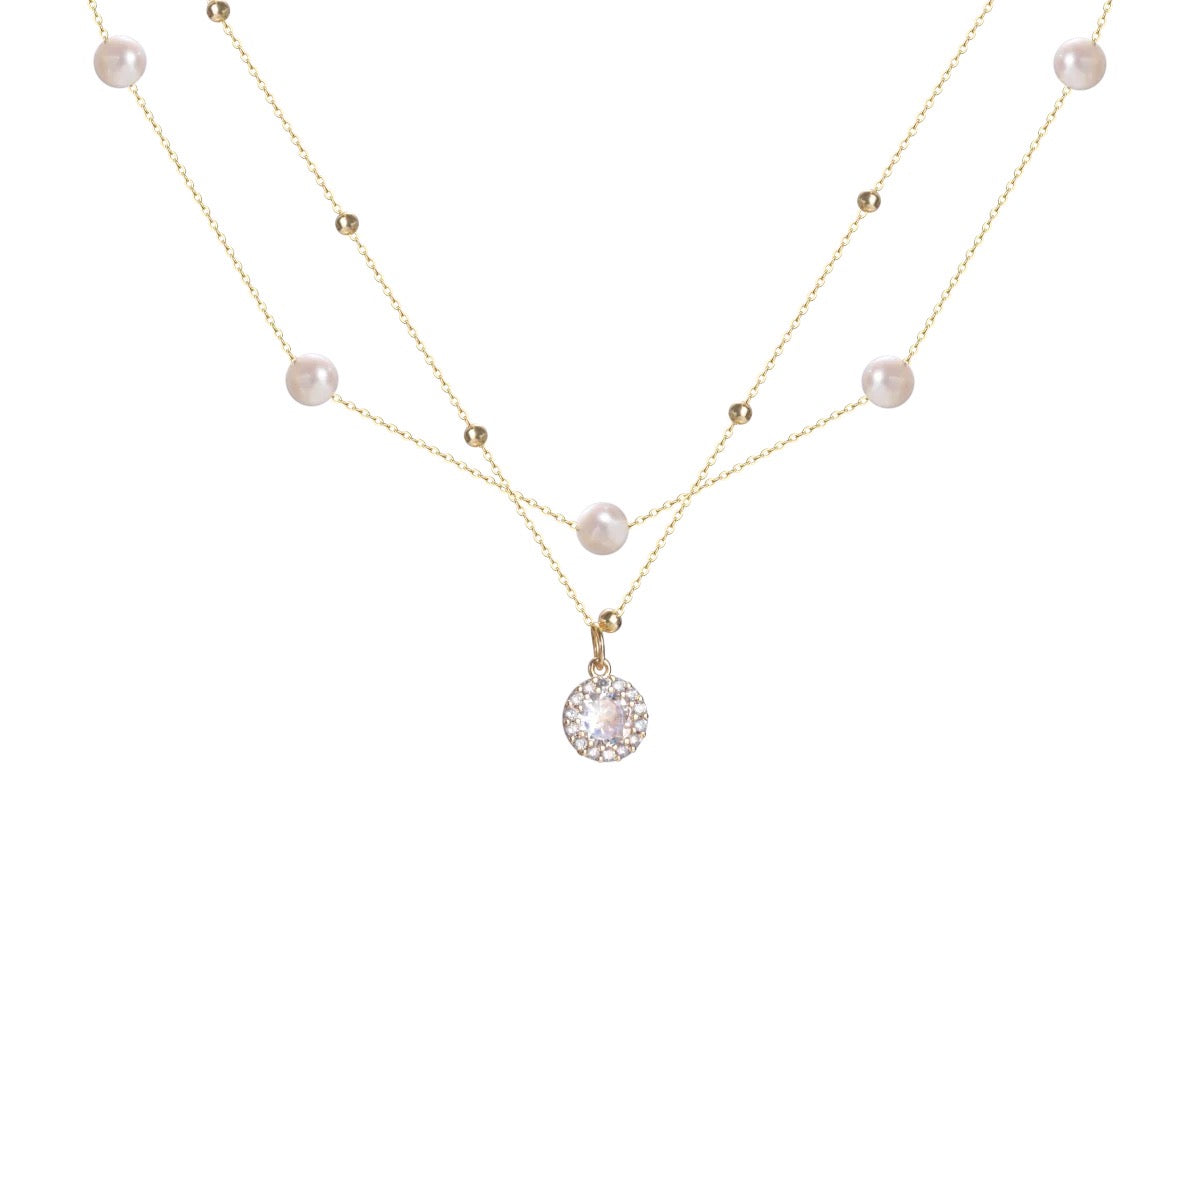 Charisma Pearl Necklace | 18k Gold Plated